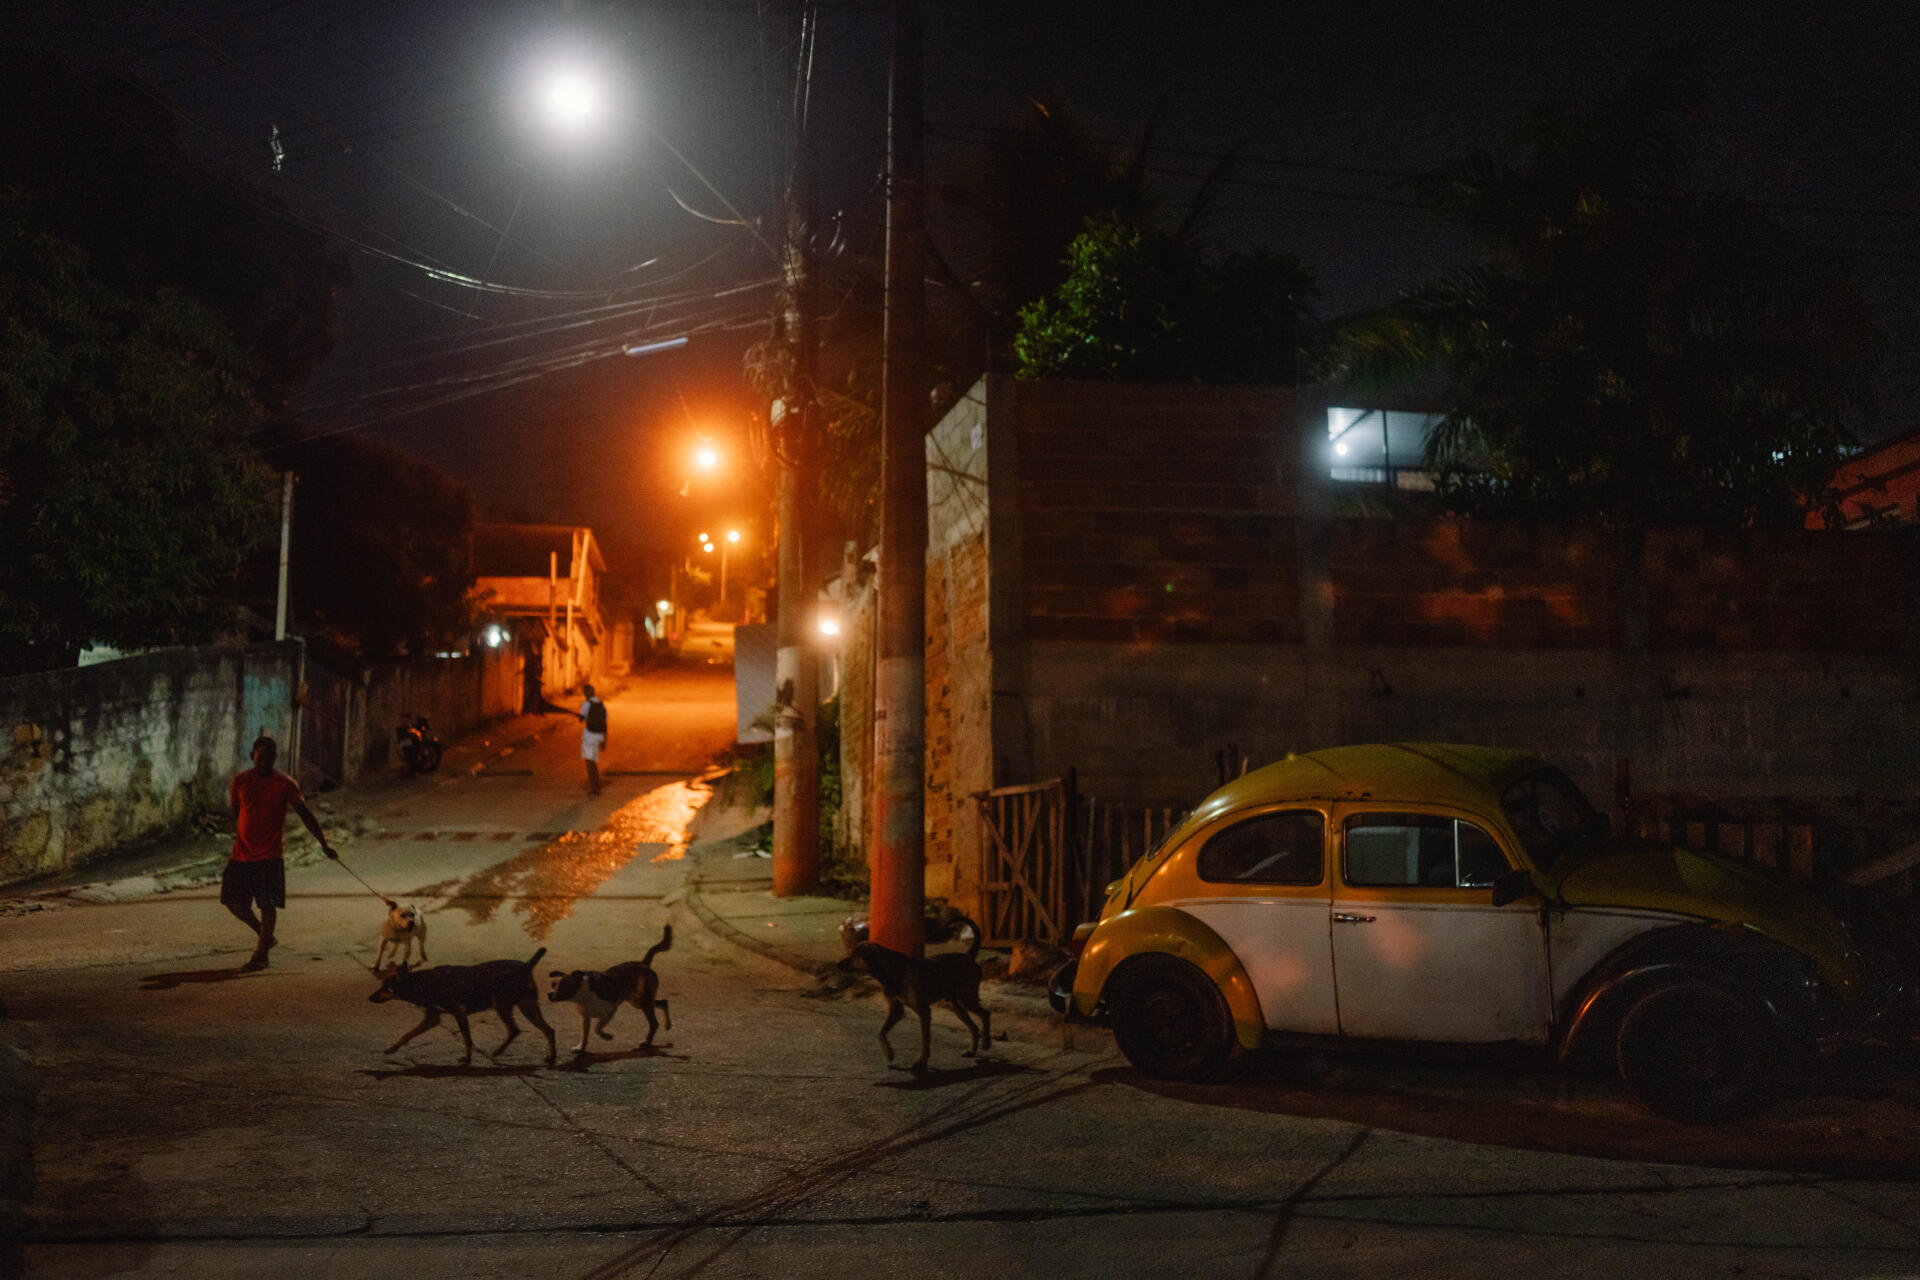 A street in the community of Parque dos Ferreiras, in Belford Roxo (Brazil), on August 3, 2022.